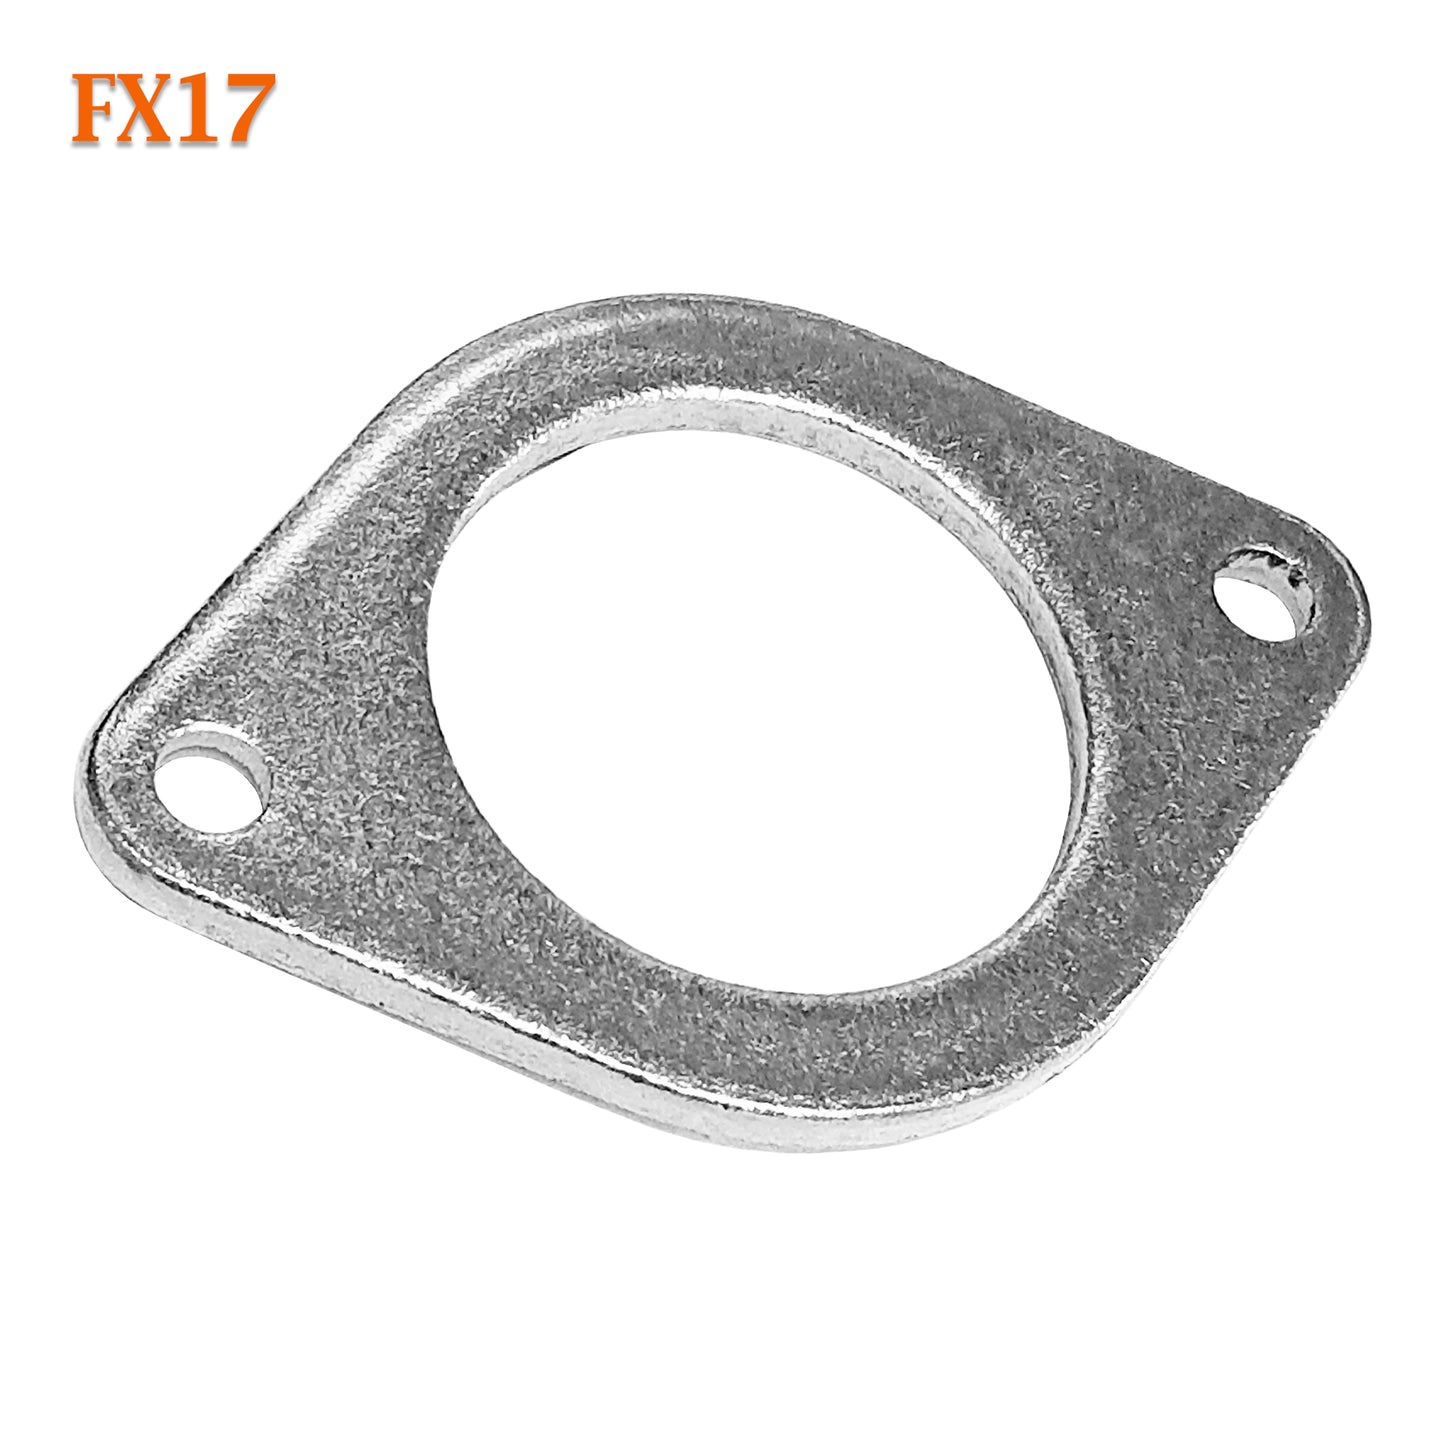 FX17 3" ID Flat Oval Two Bolt Exhaust Flange Repair Replacement Fits 3" Pipe